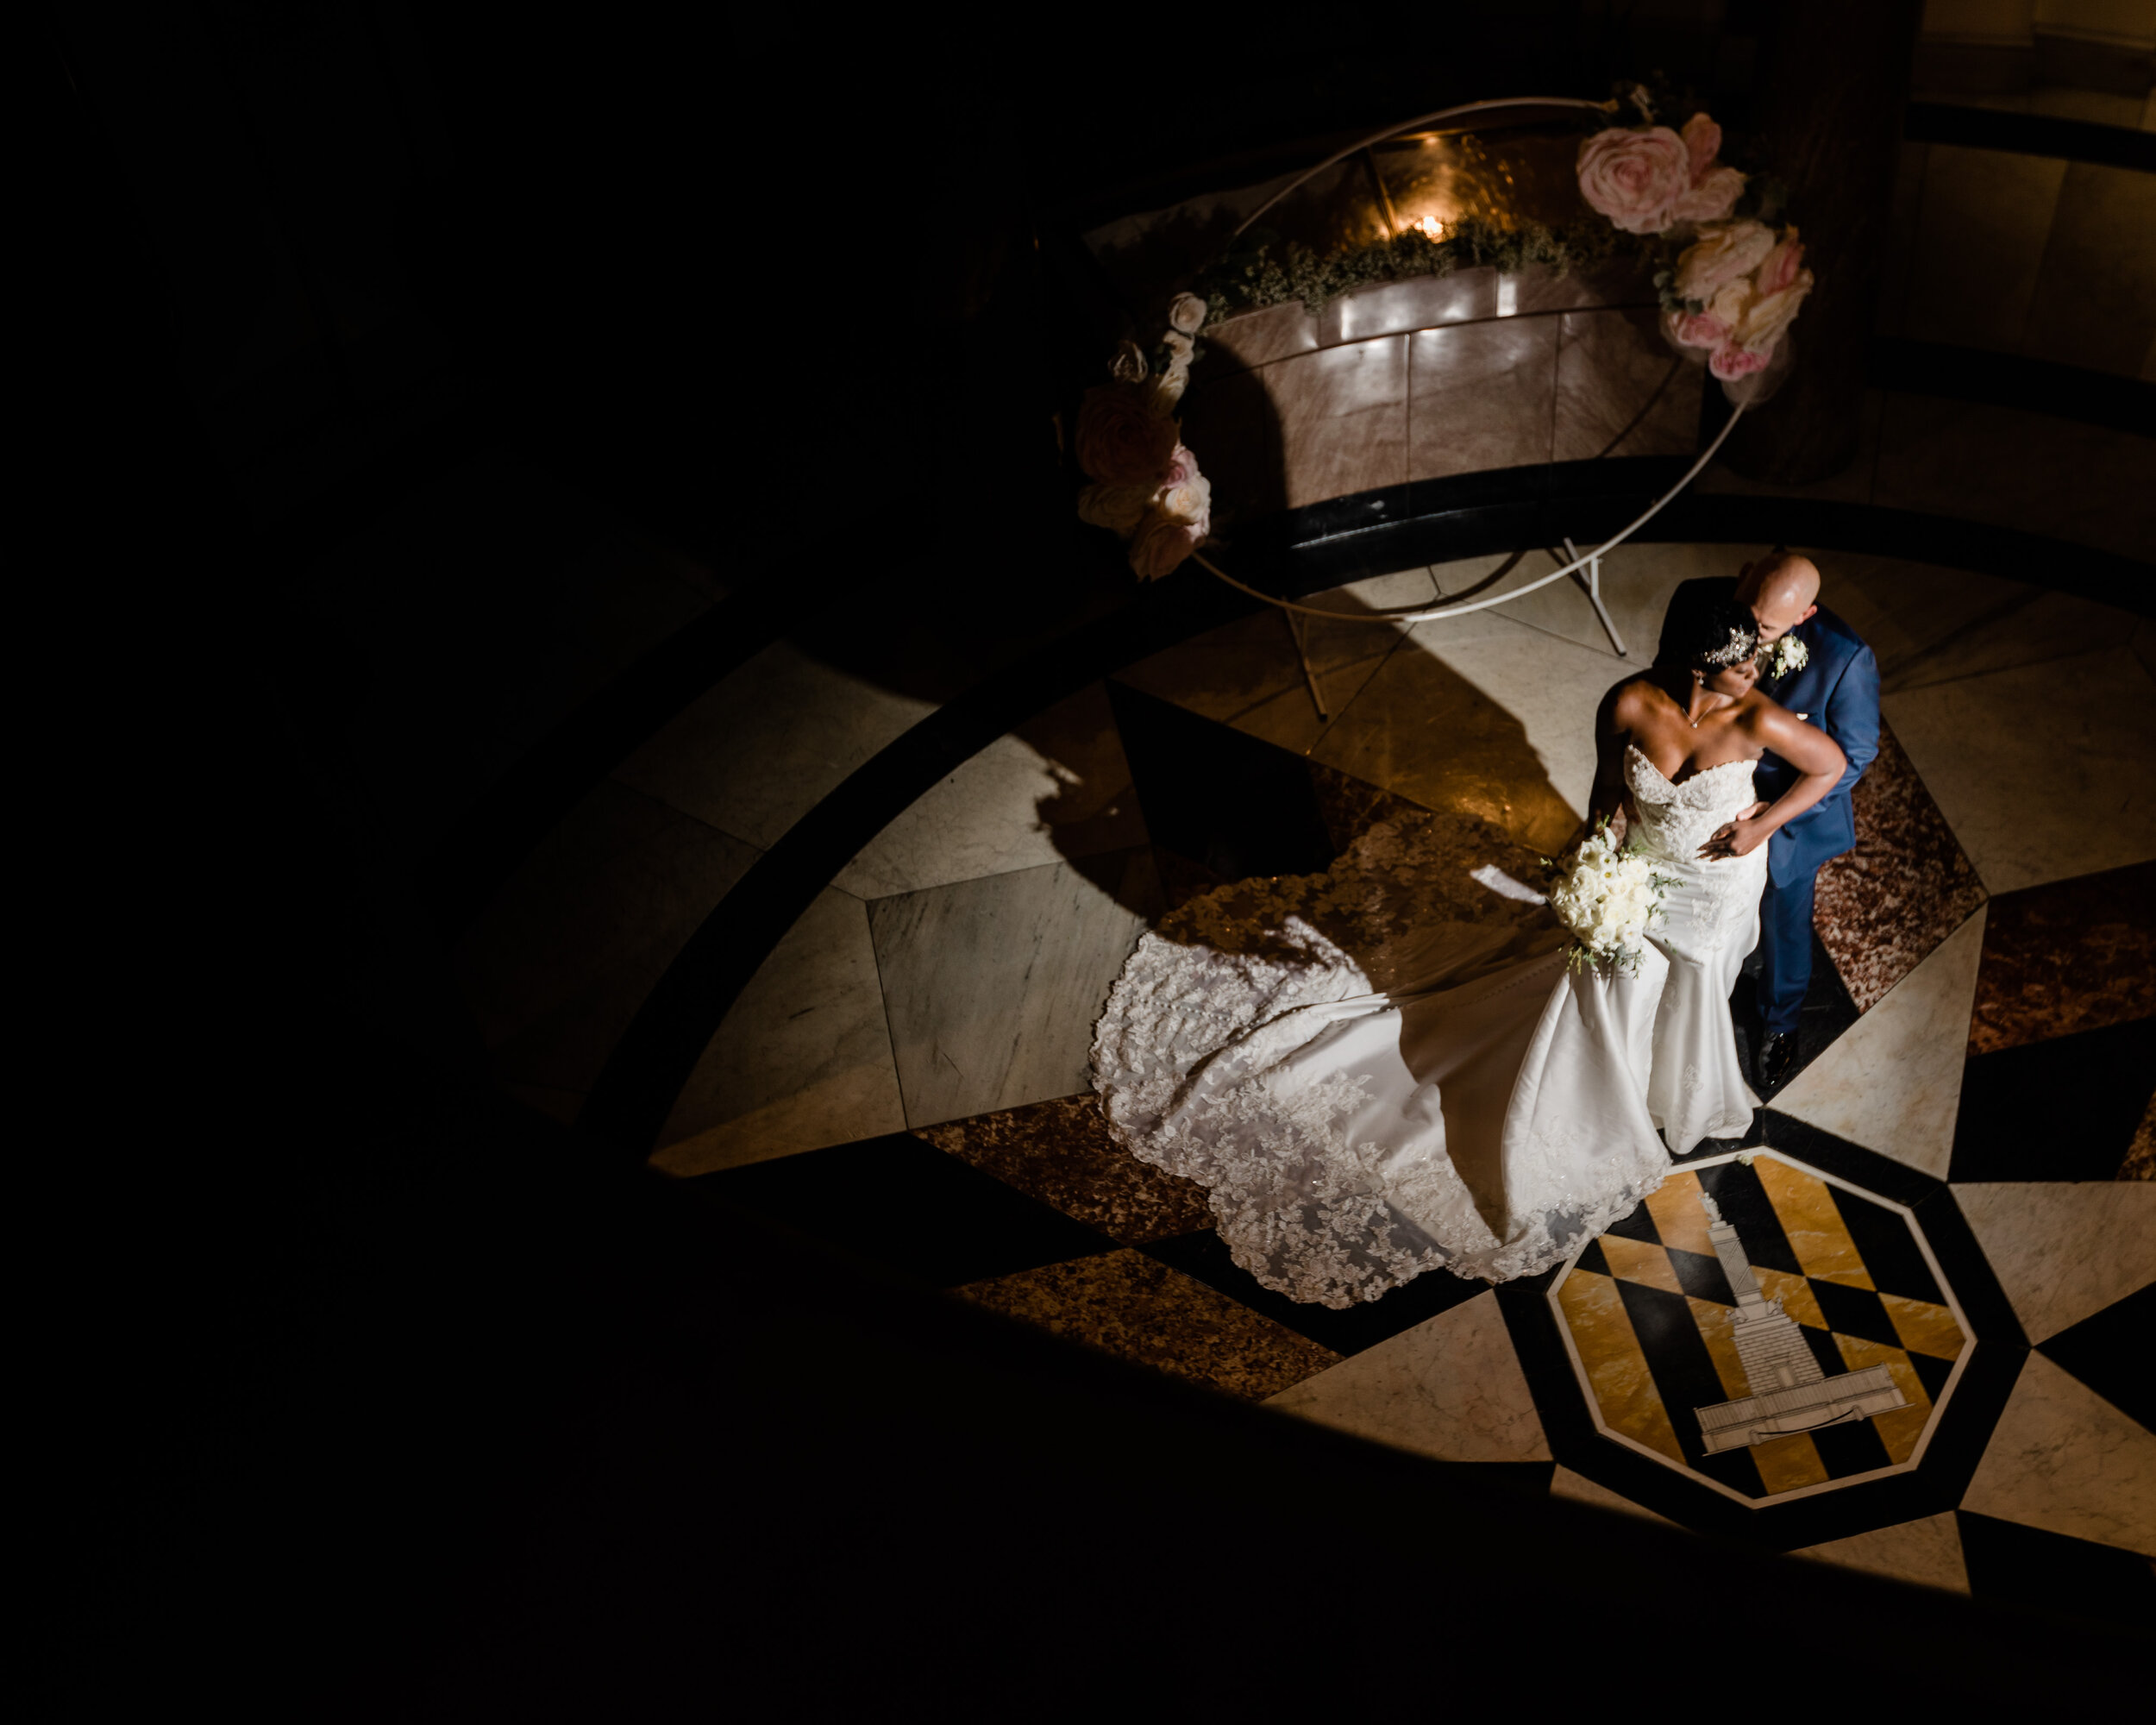 get married in baltimore city hall shot by megapixels media biracial couple wedding photographers maryland-85.jpg